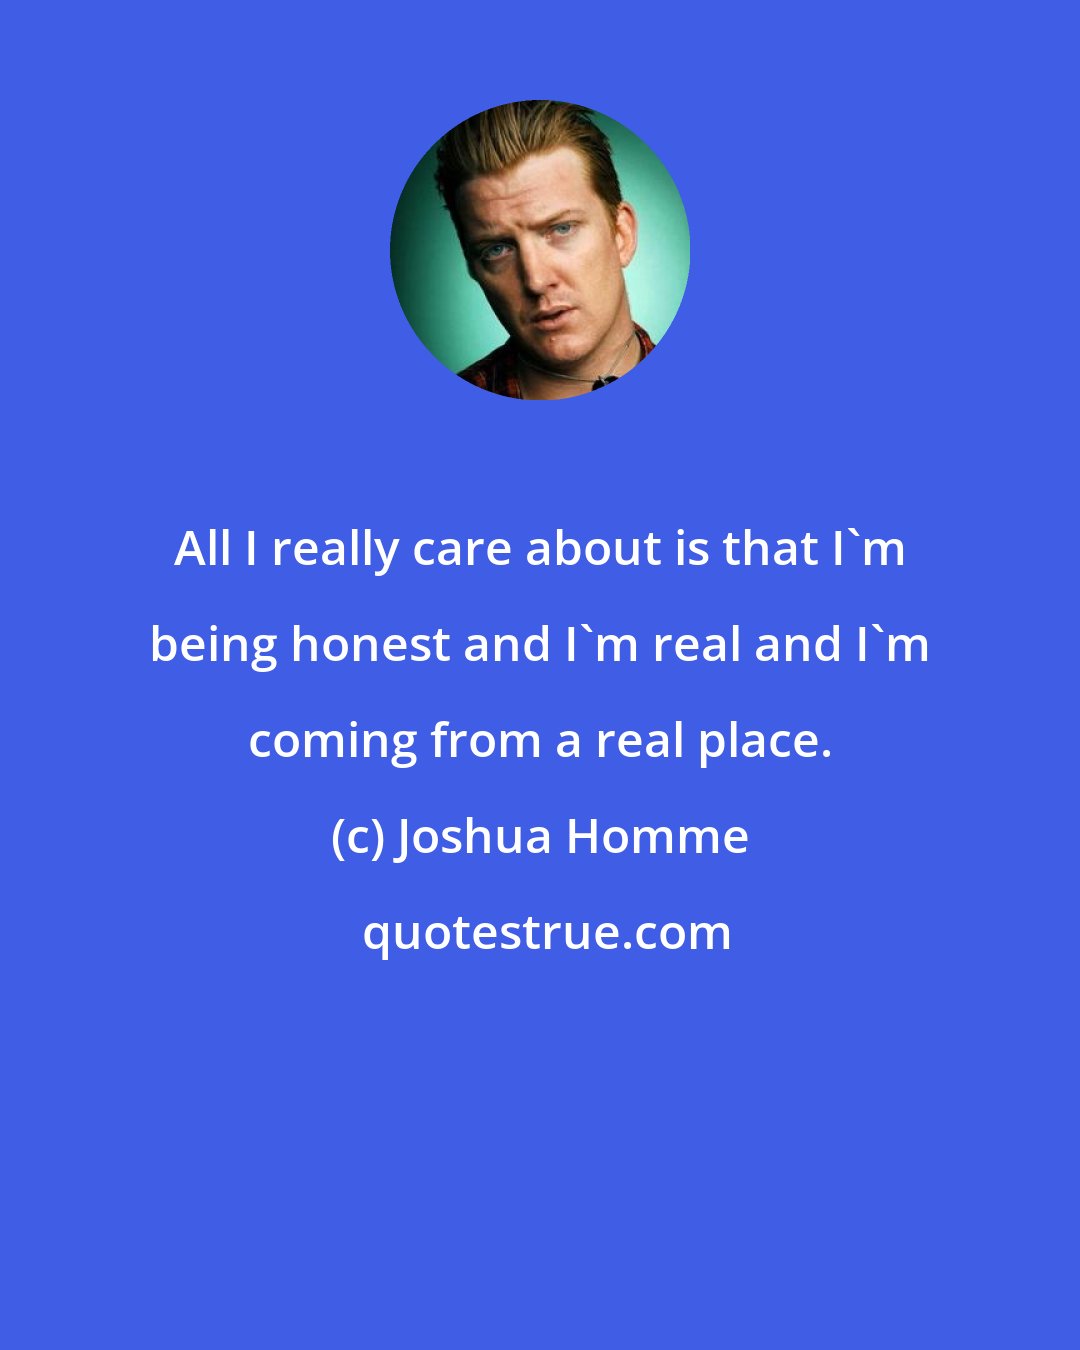 Joshua Homme: All I really care about is that I'm being honest and I'm real and I'm coming from a real place.